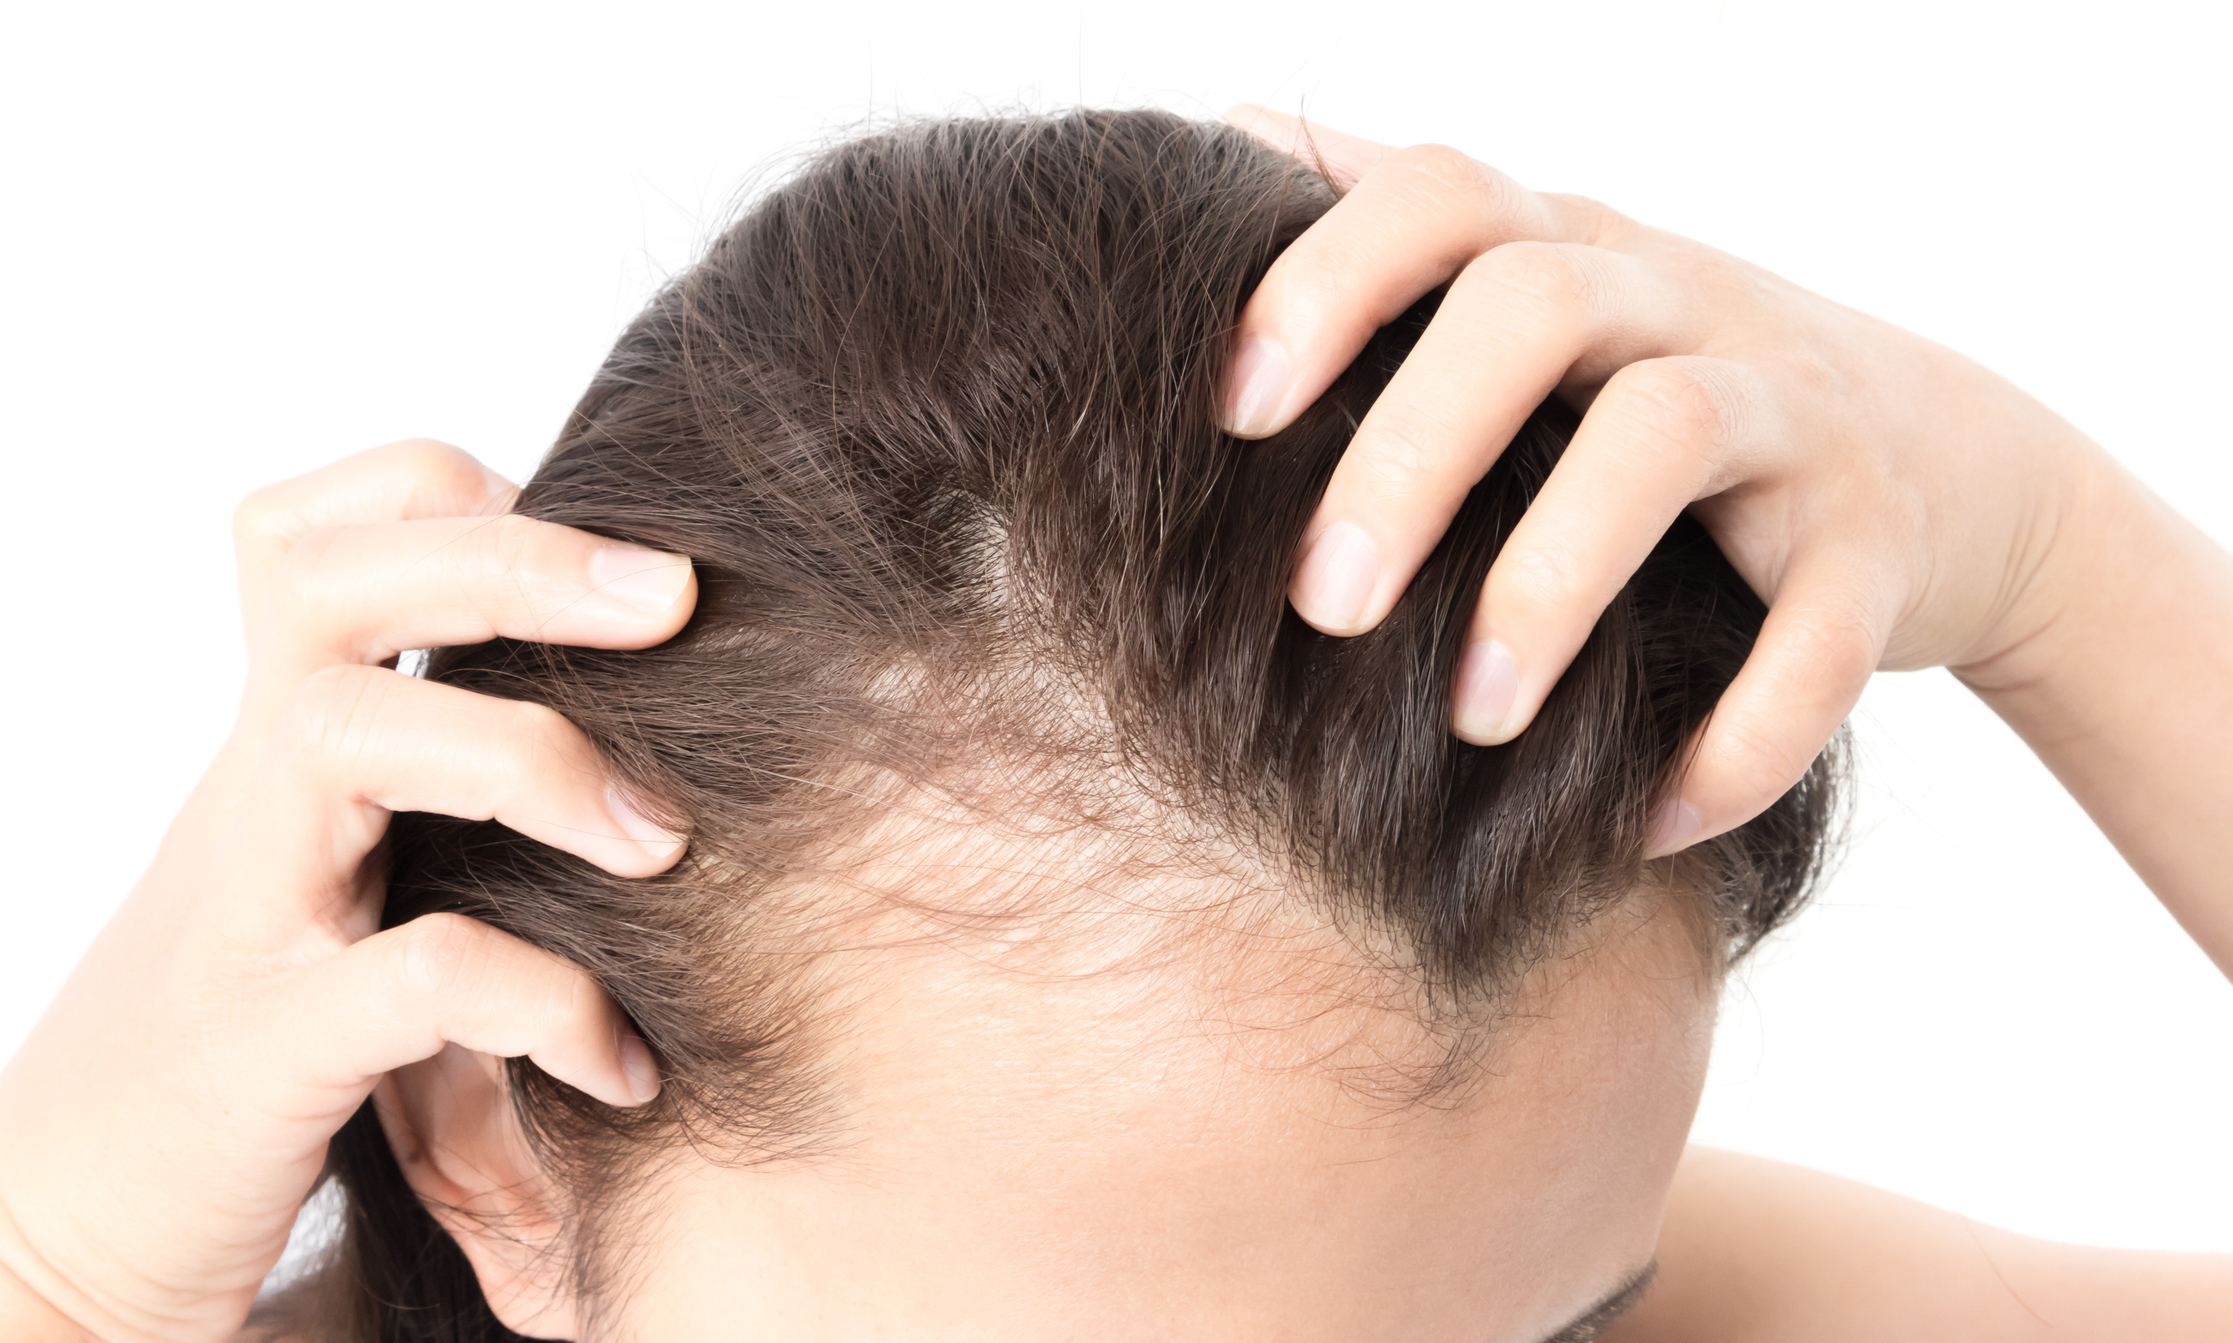 Woman serious hair loss problem for health care shampoo